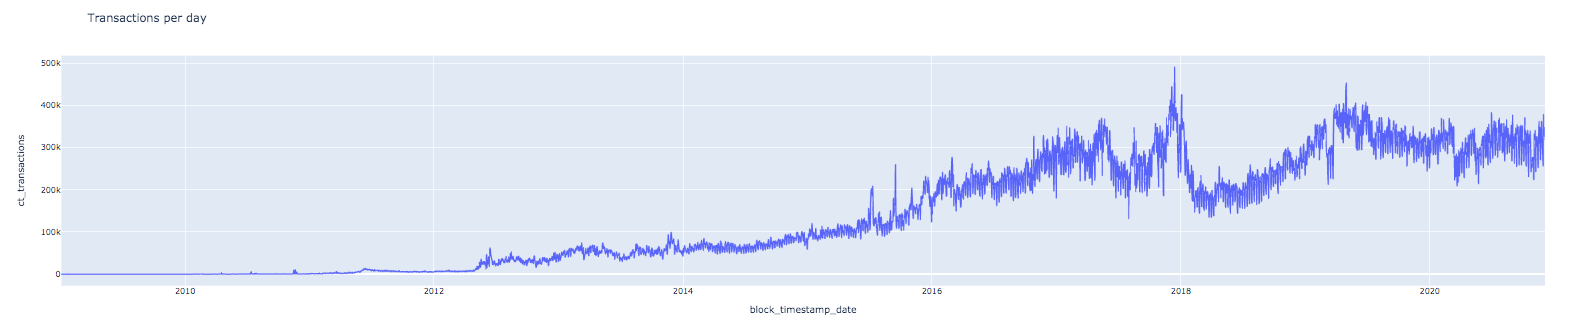 transactions per day